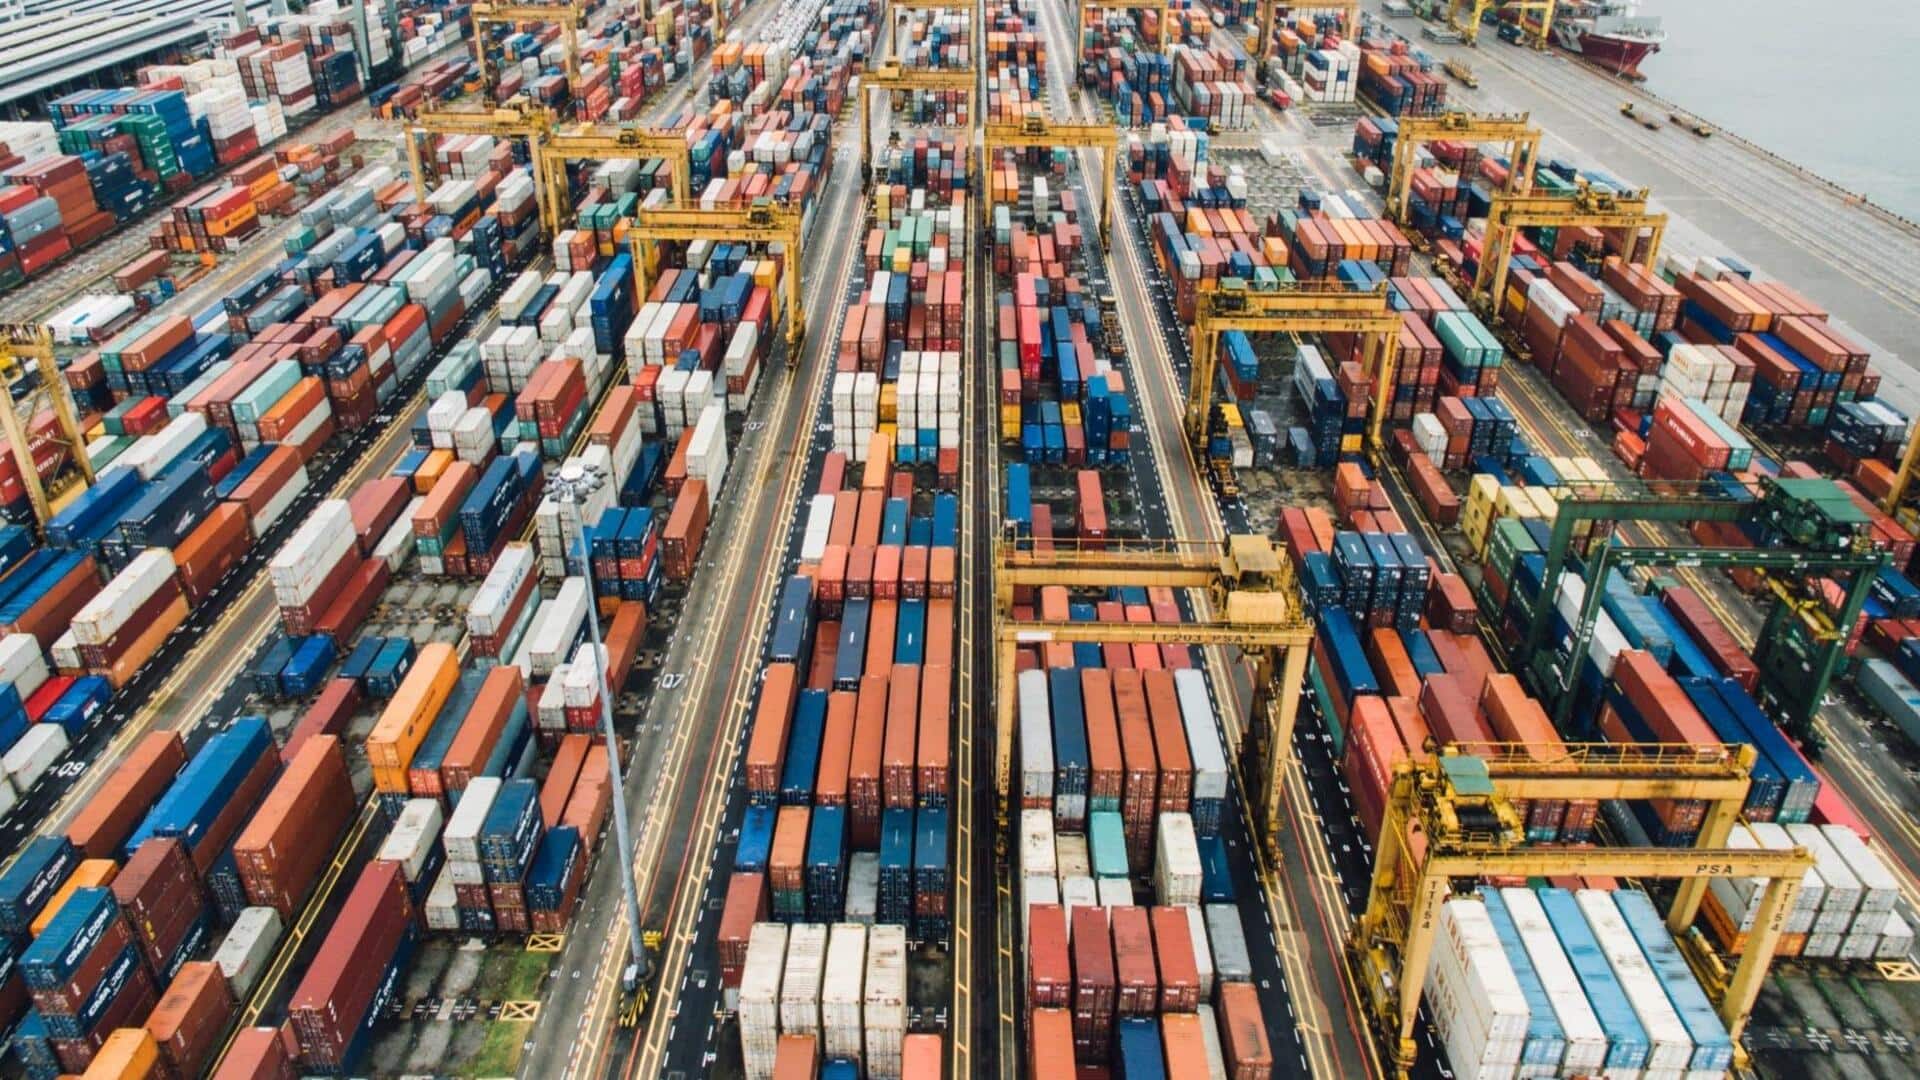 India's exports declined 2.6% YoY in September amid global headwinds